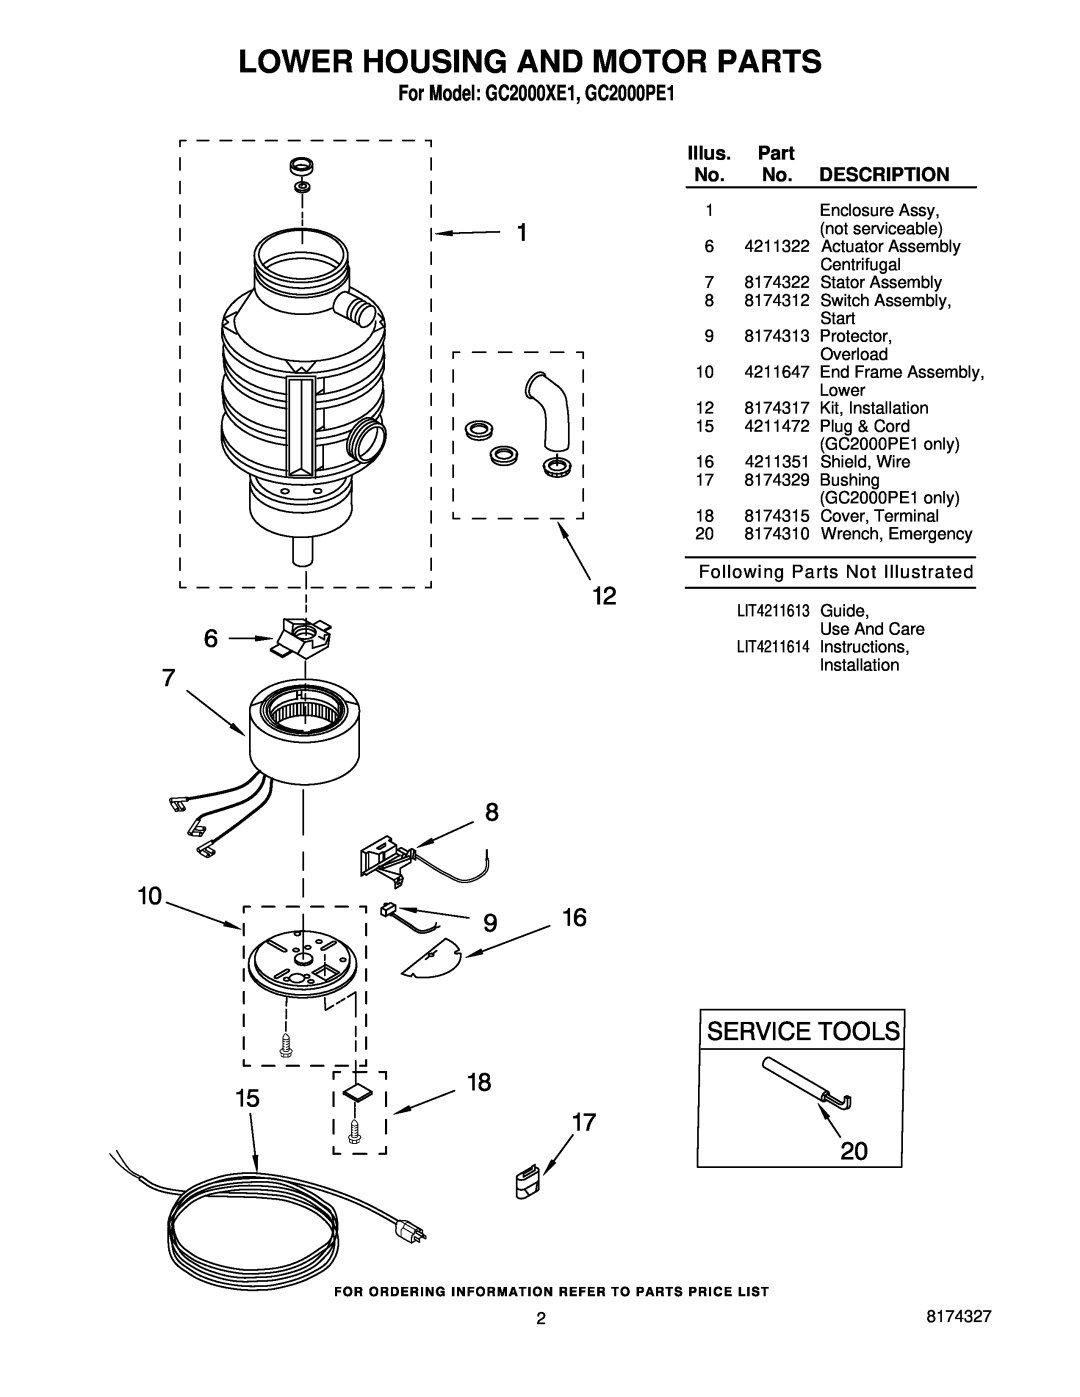 Whirlpool manual Lower Housing And Motor Parts, Illus, Description, For Model GC2000XE1, GC2000PE1 